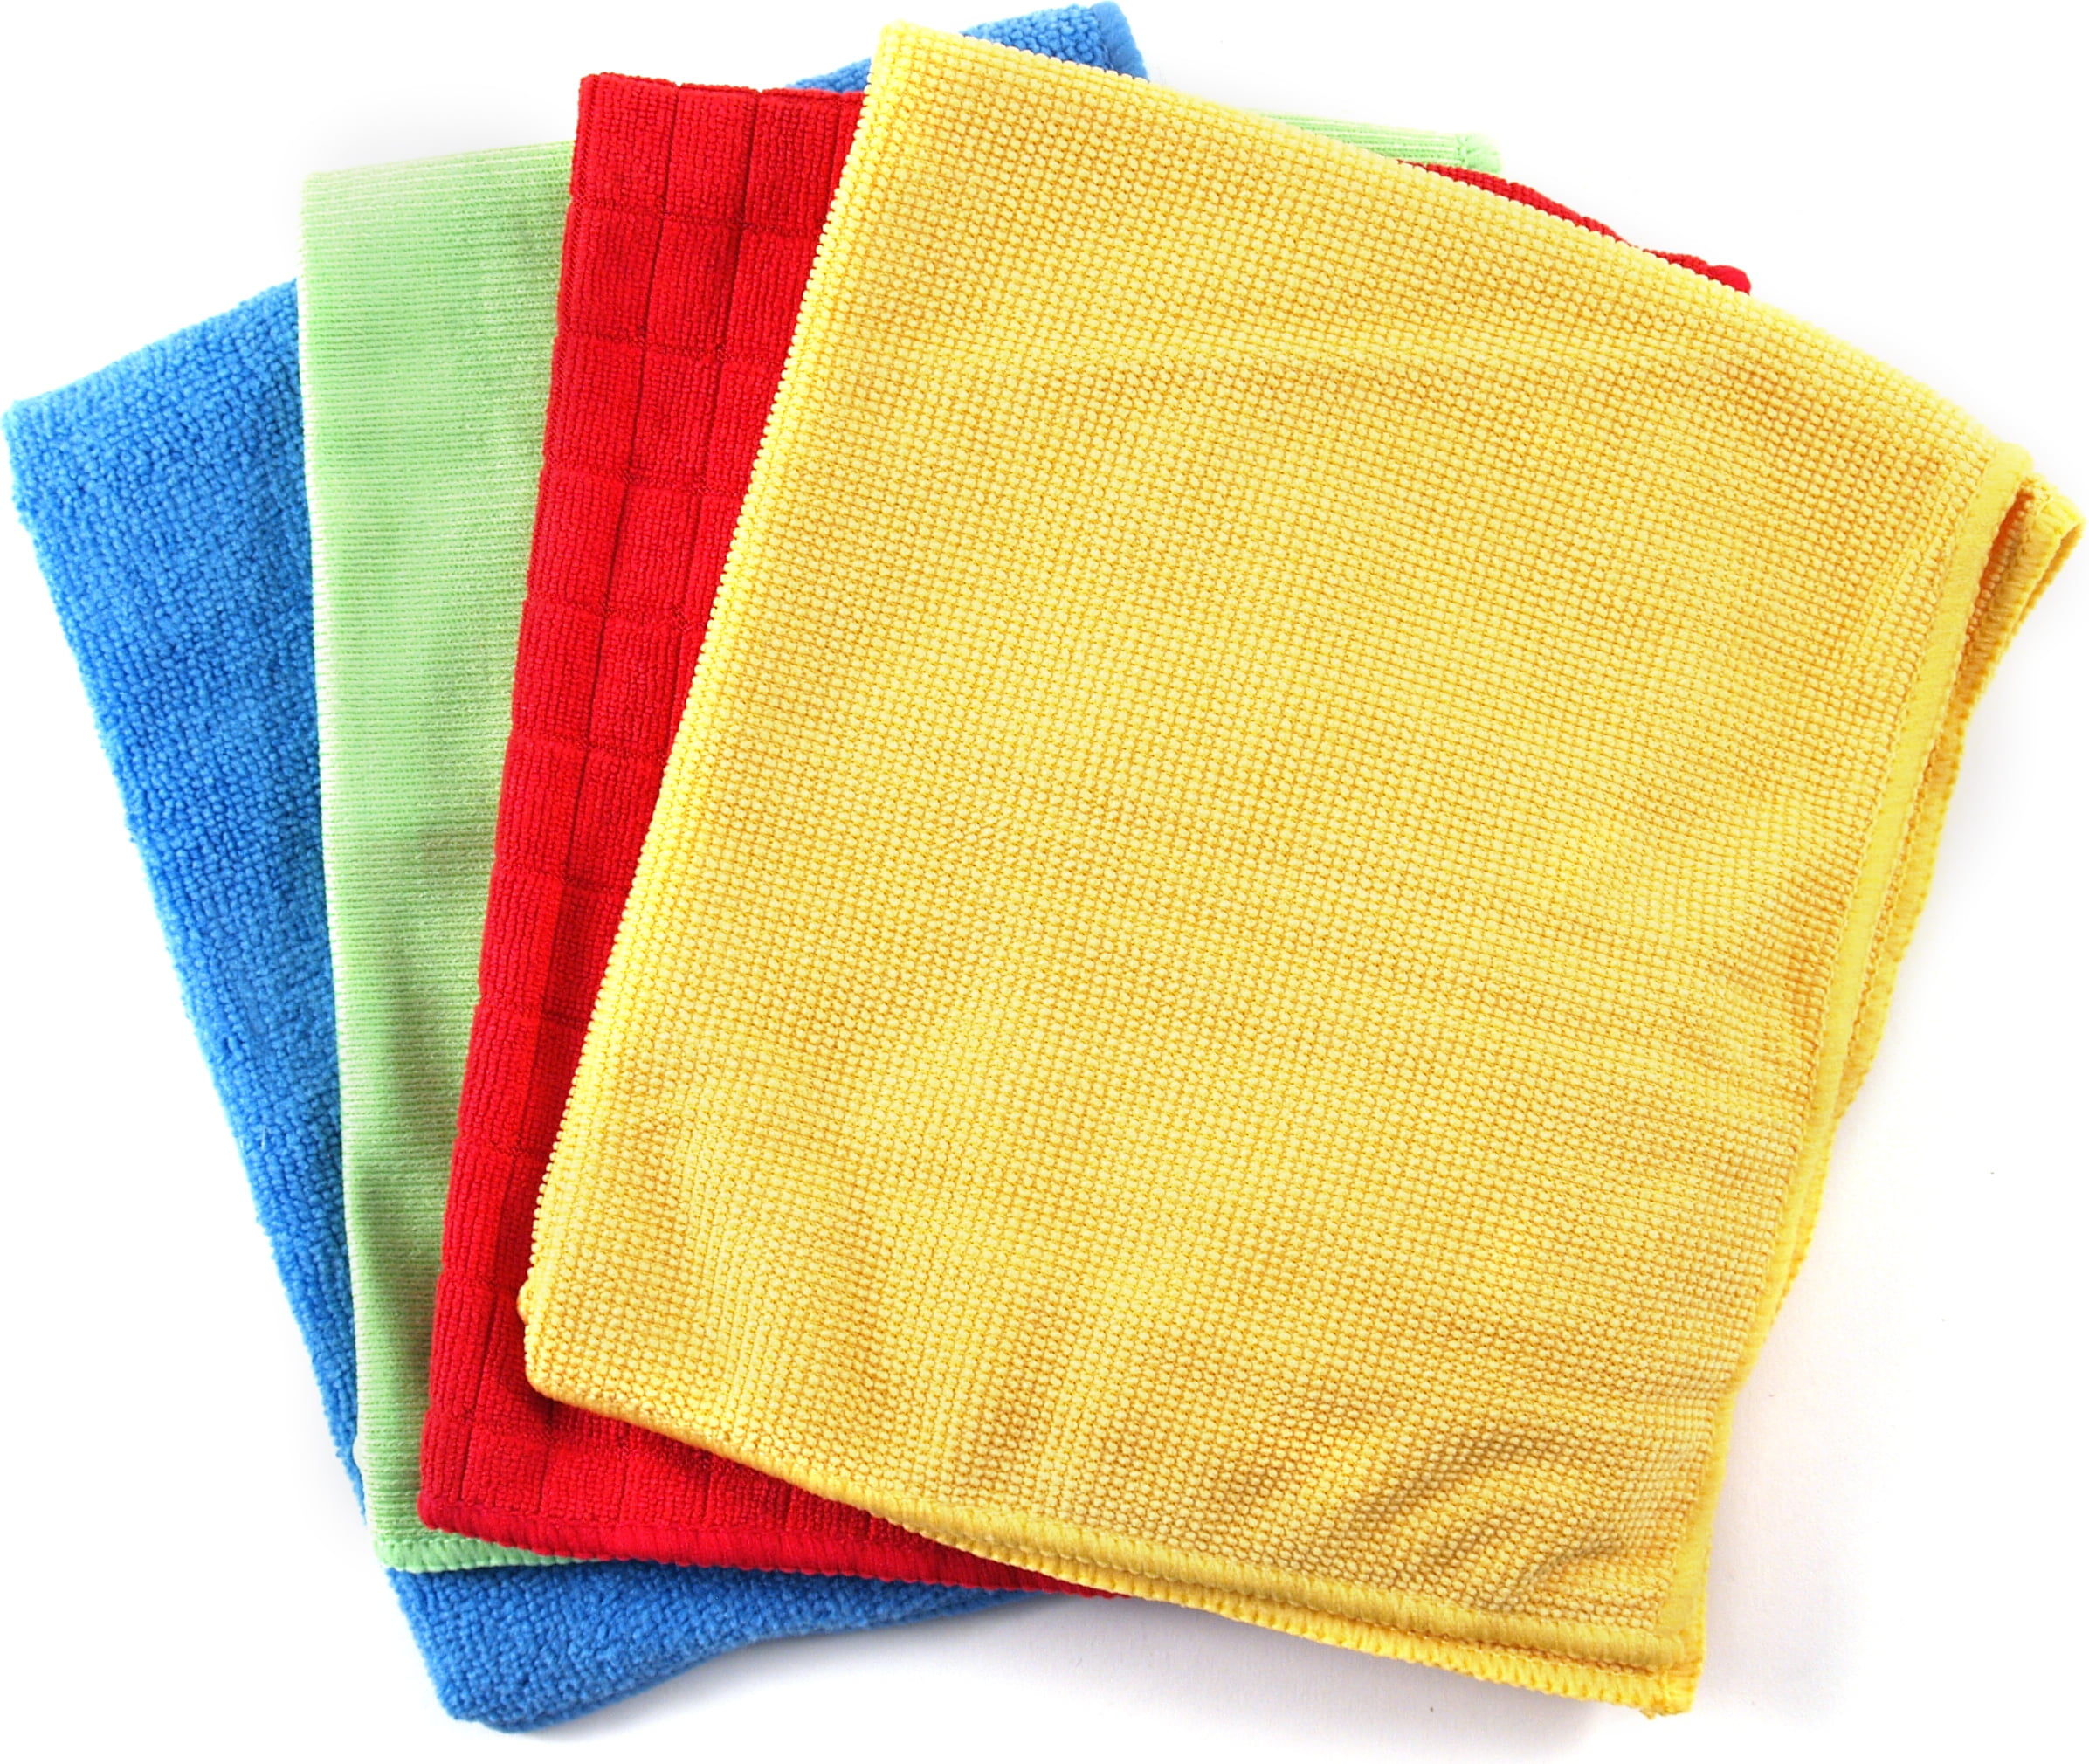 Blue, Red, Yellow, and Green Microfiber High Performance Cleaning Cloth ...